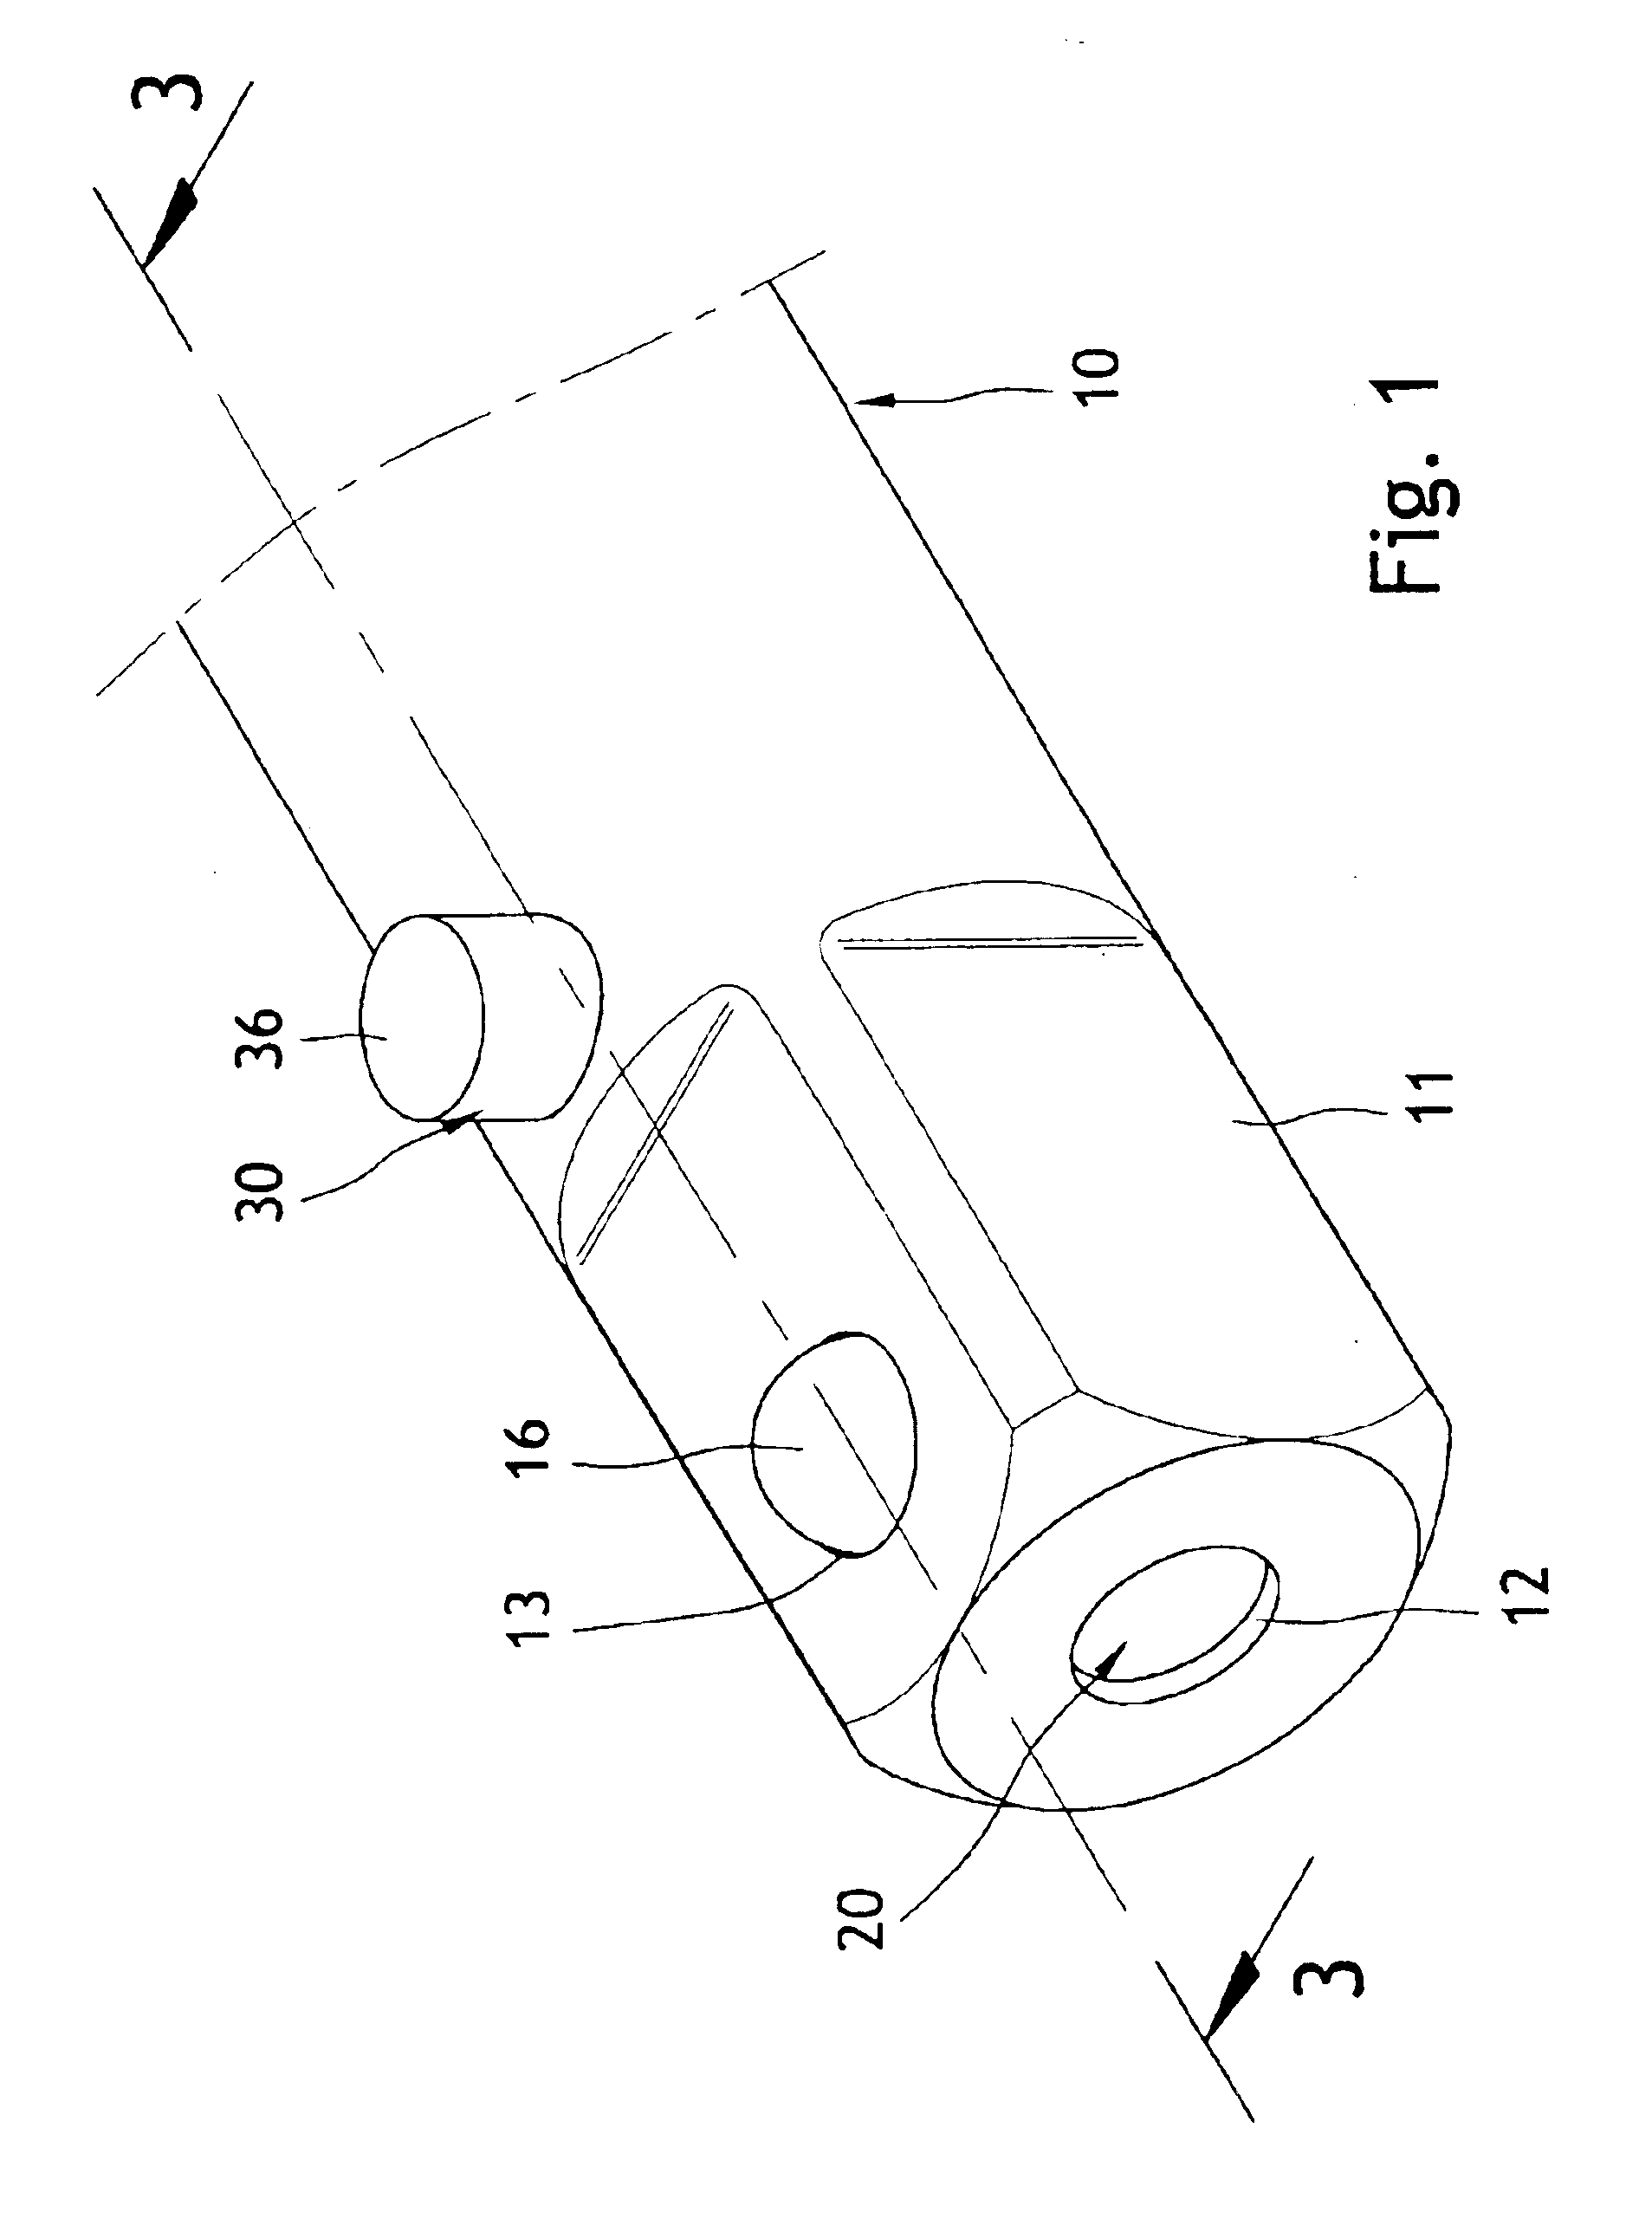 Wrench extension with a socket-coupling system